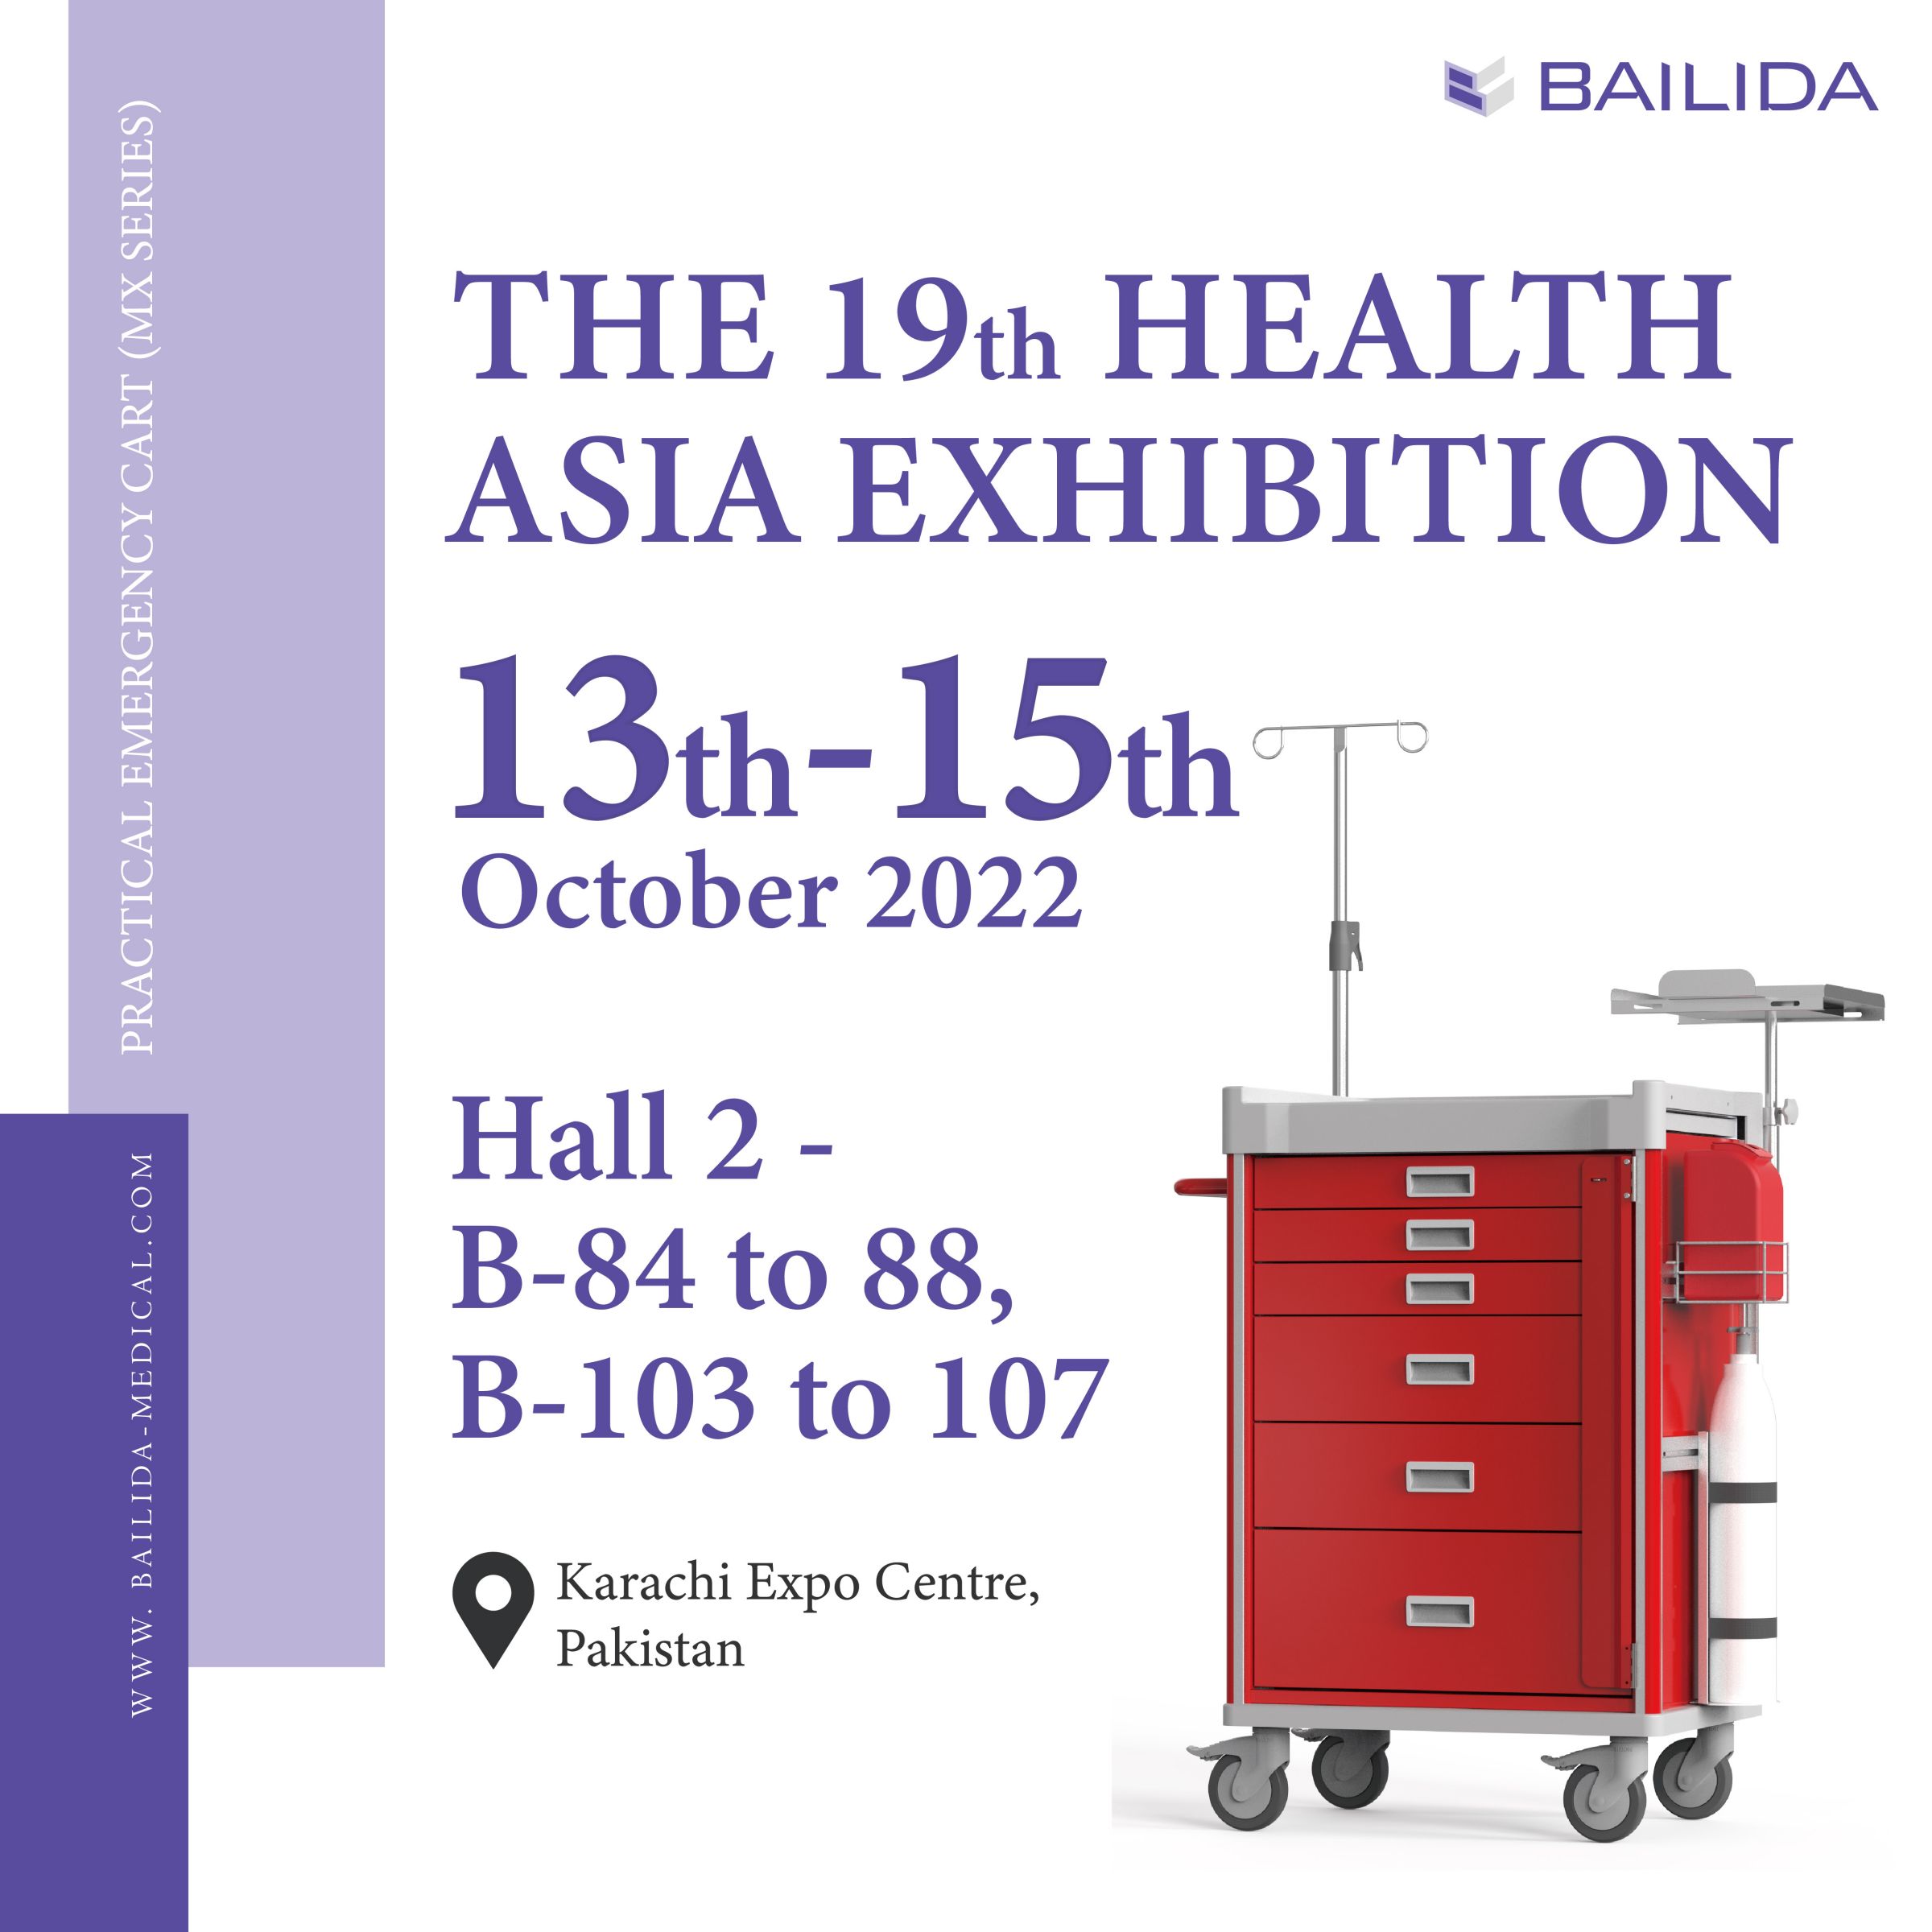 The 19th Health Asia Exhibition.